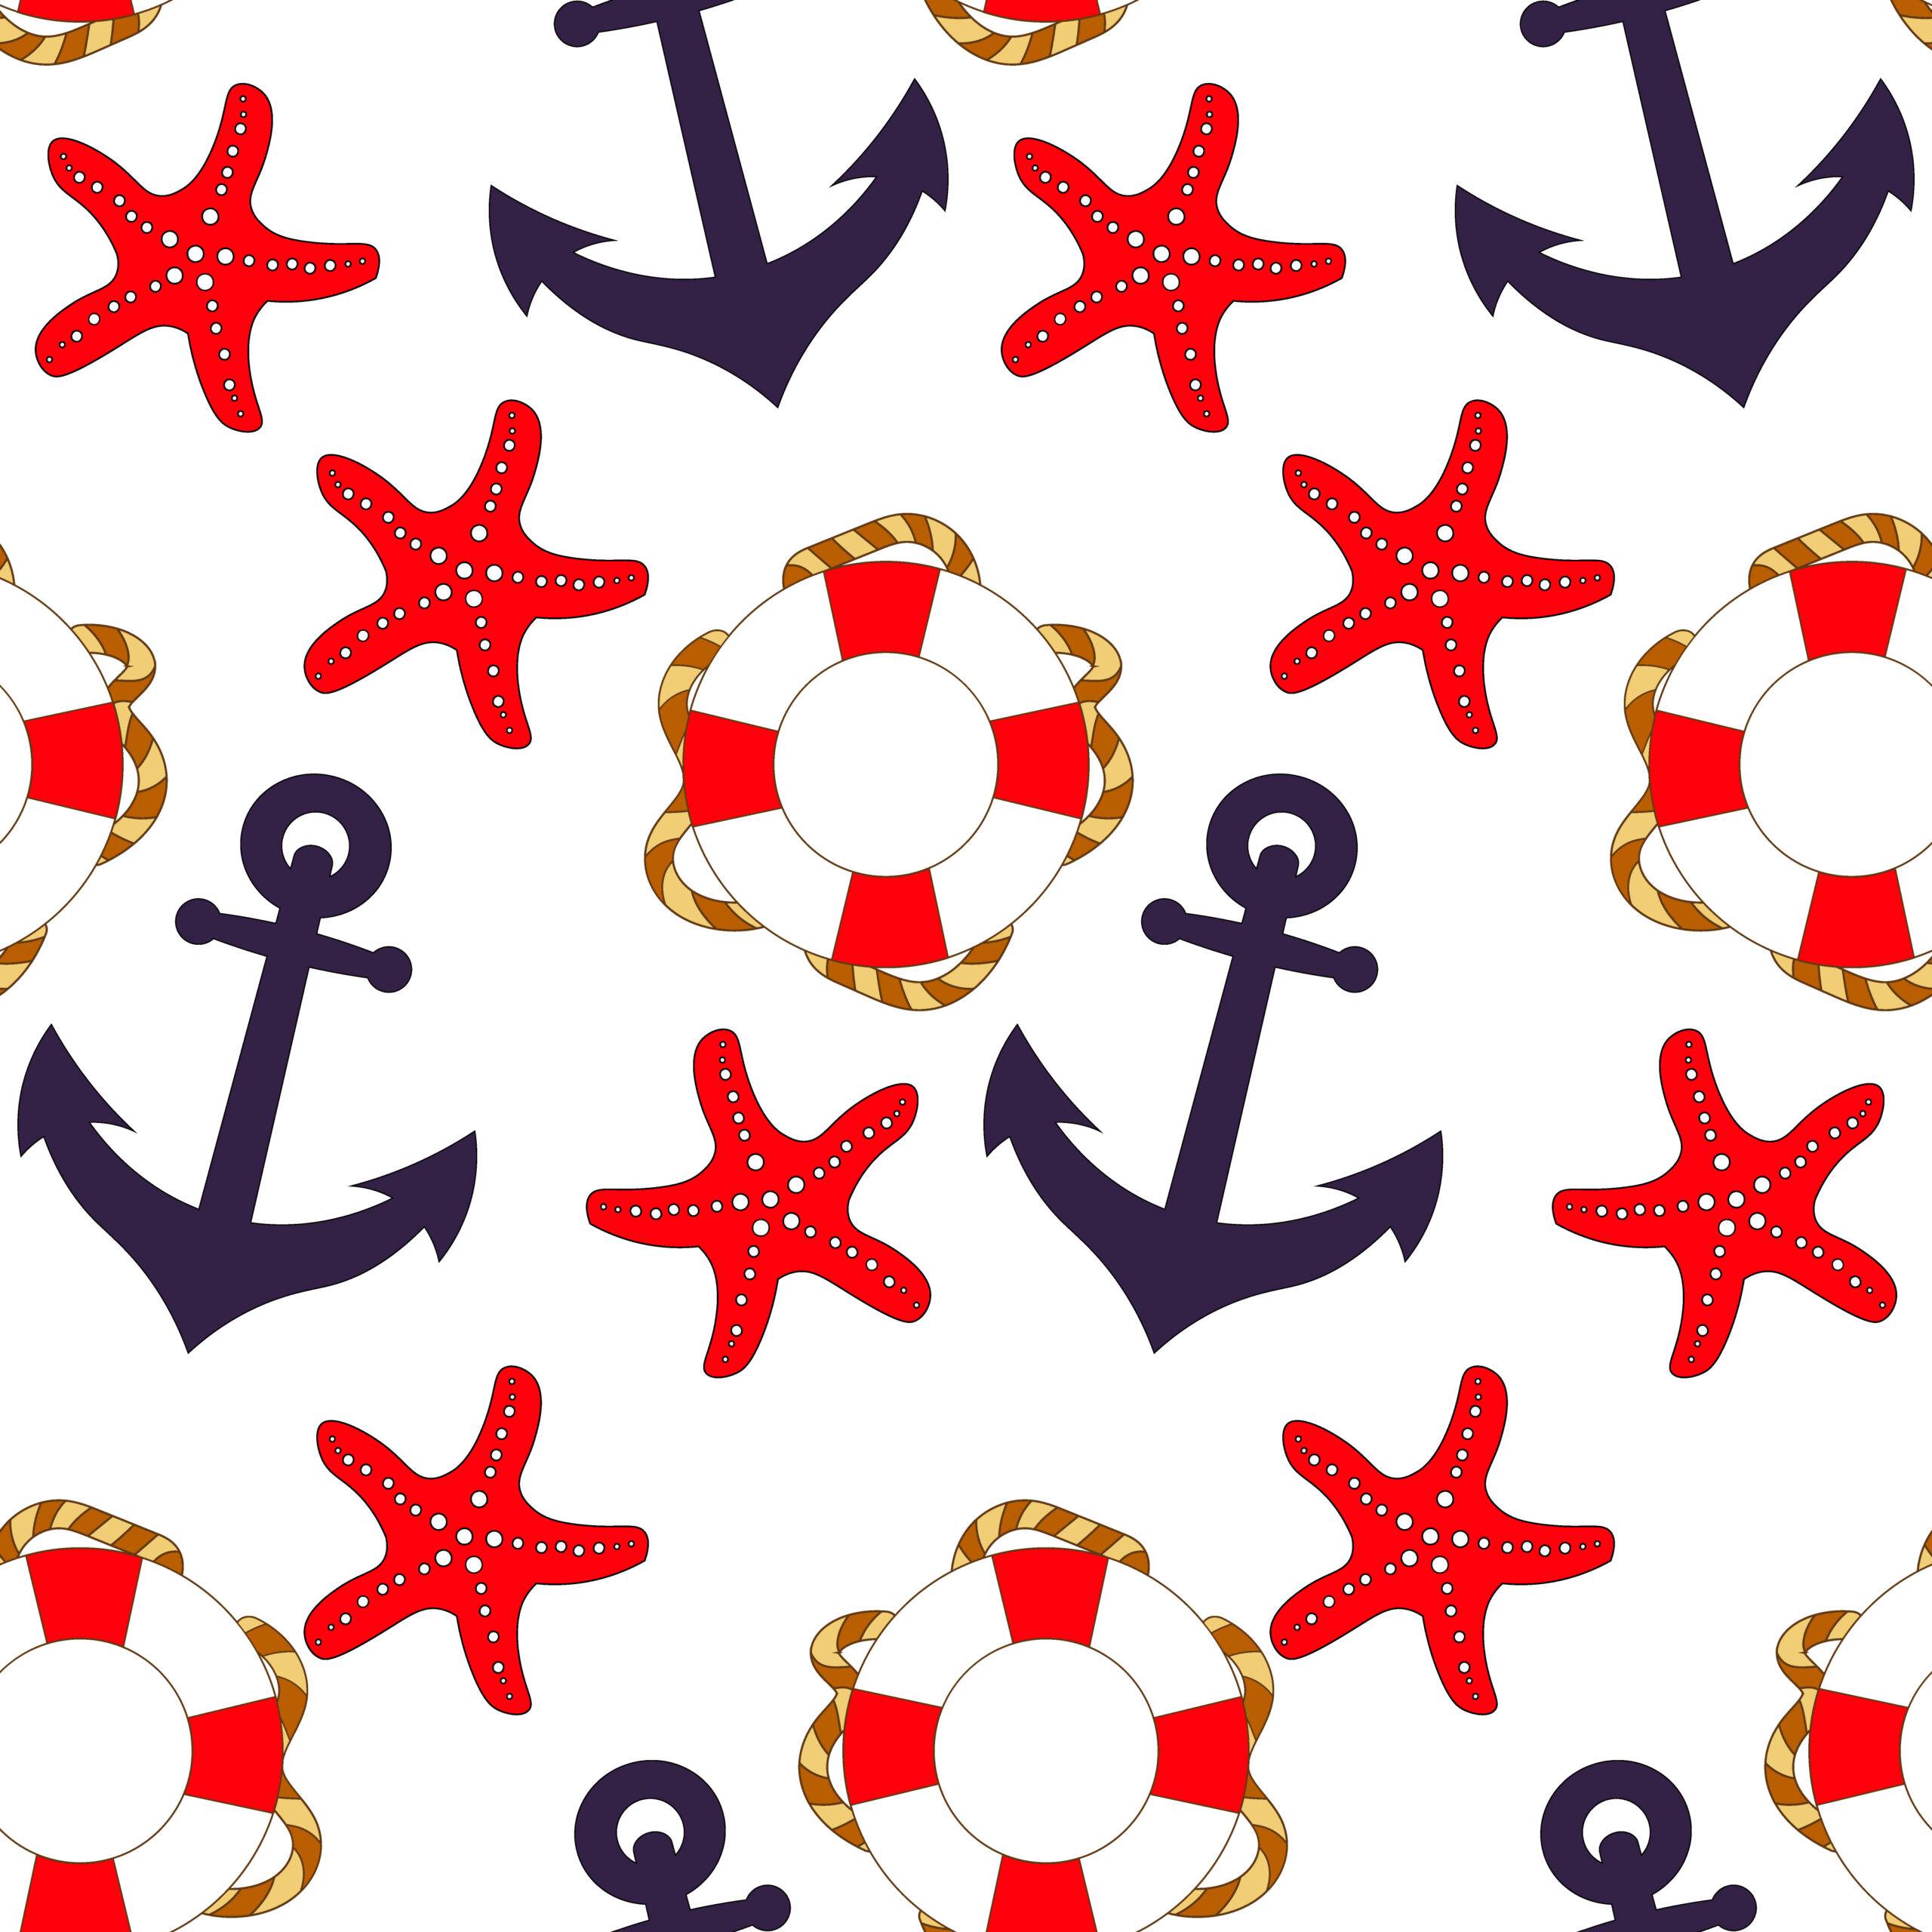 Nautical pattern with anchors, starfish, and lifebuoys on a white background.